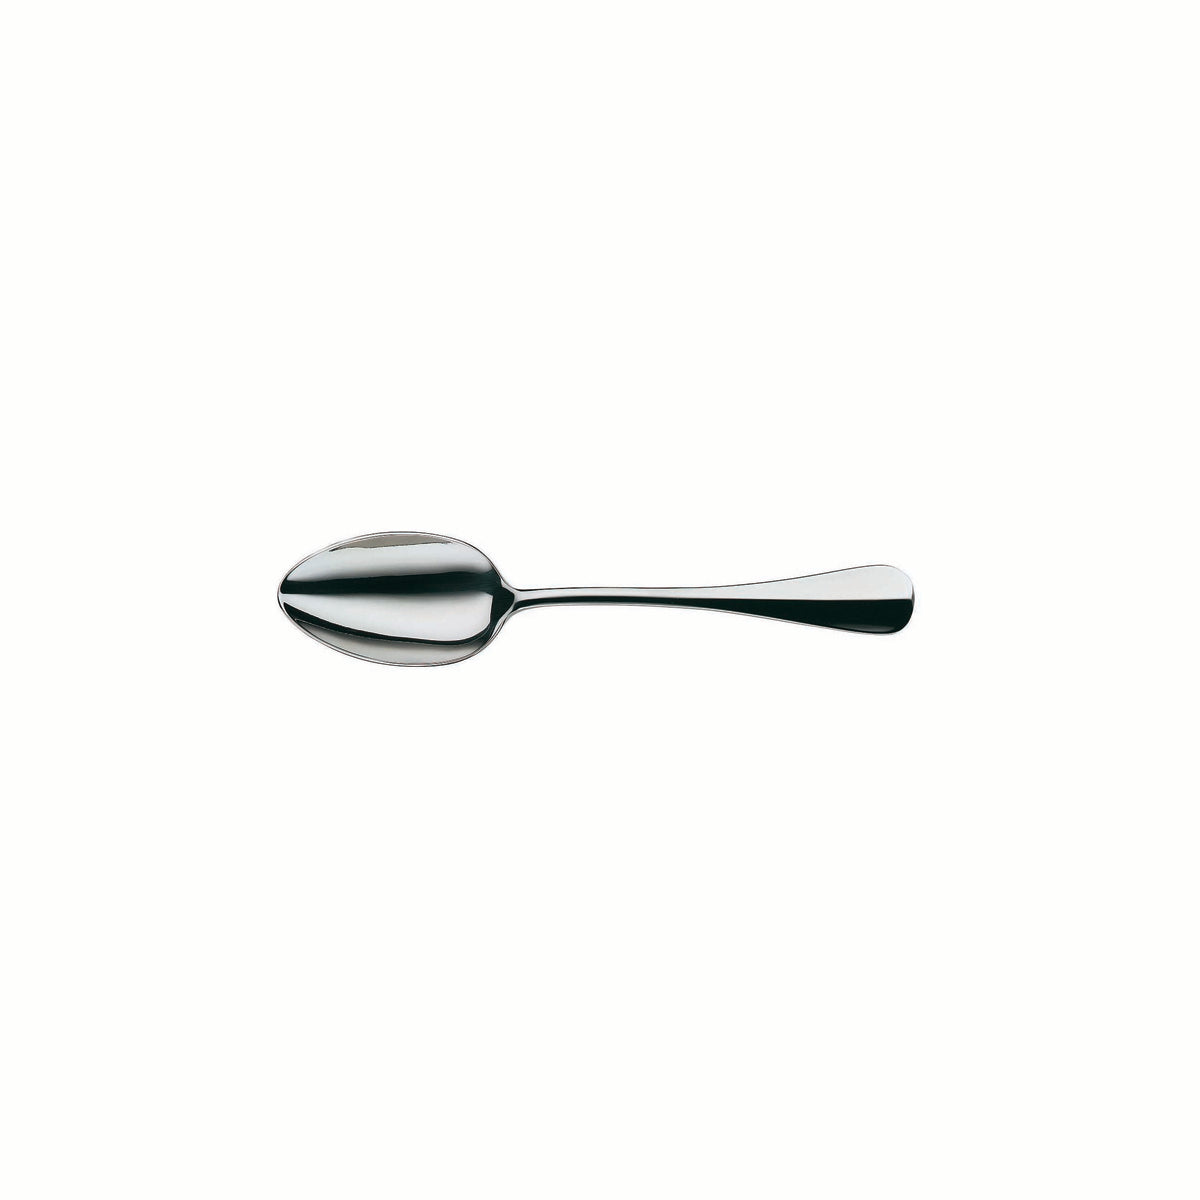 11.0115.6041 WMF Baguette Table Spoon Small Stainless Steel Tomkin Australia Hospitality Supplies